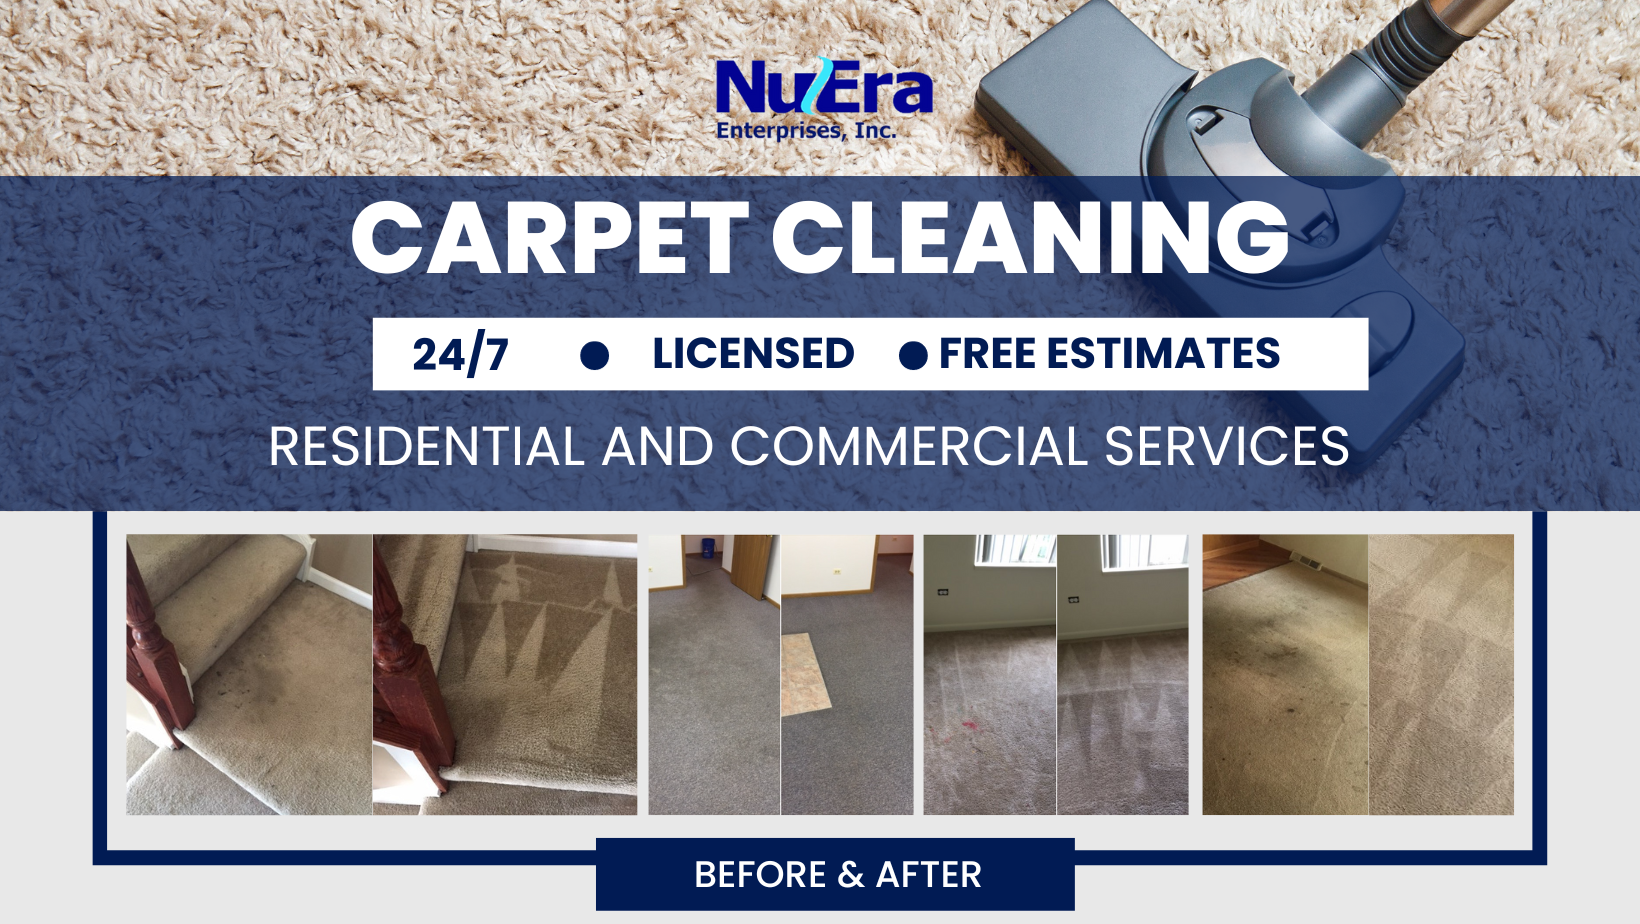 carpet cleaning professional services provided by NuEra Enterprises